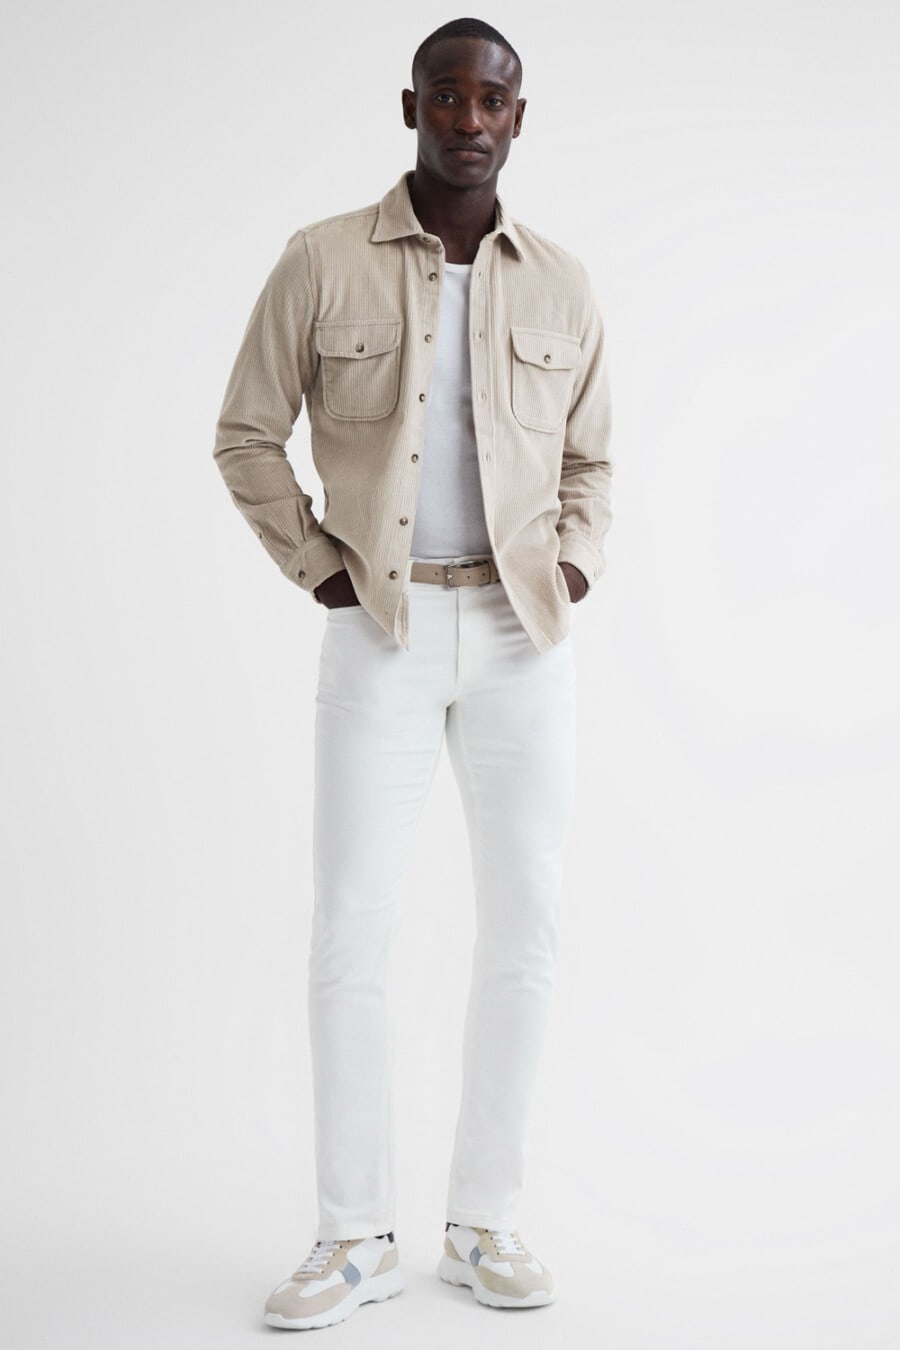 Men's white jeans, white T-shirt tucked in, beige corduroy shacket, beige suede belt and white/beige sneakers outfit